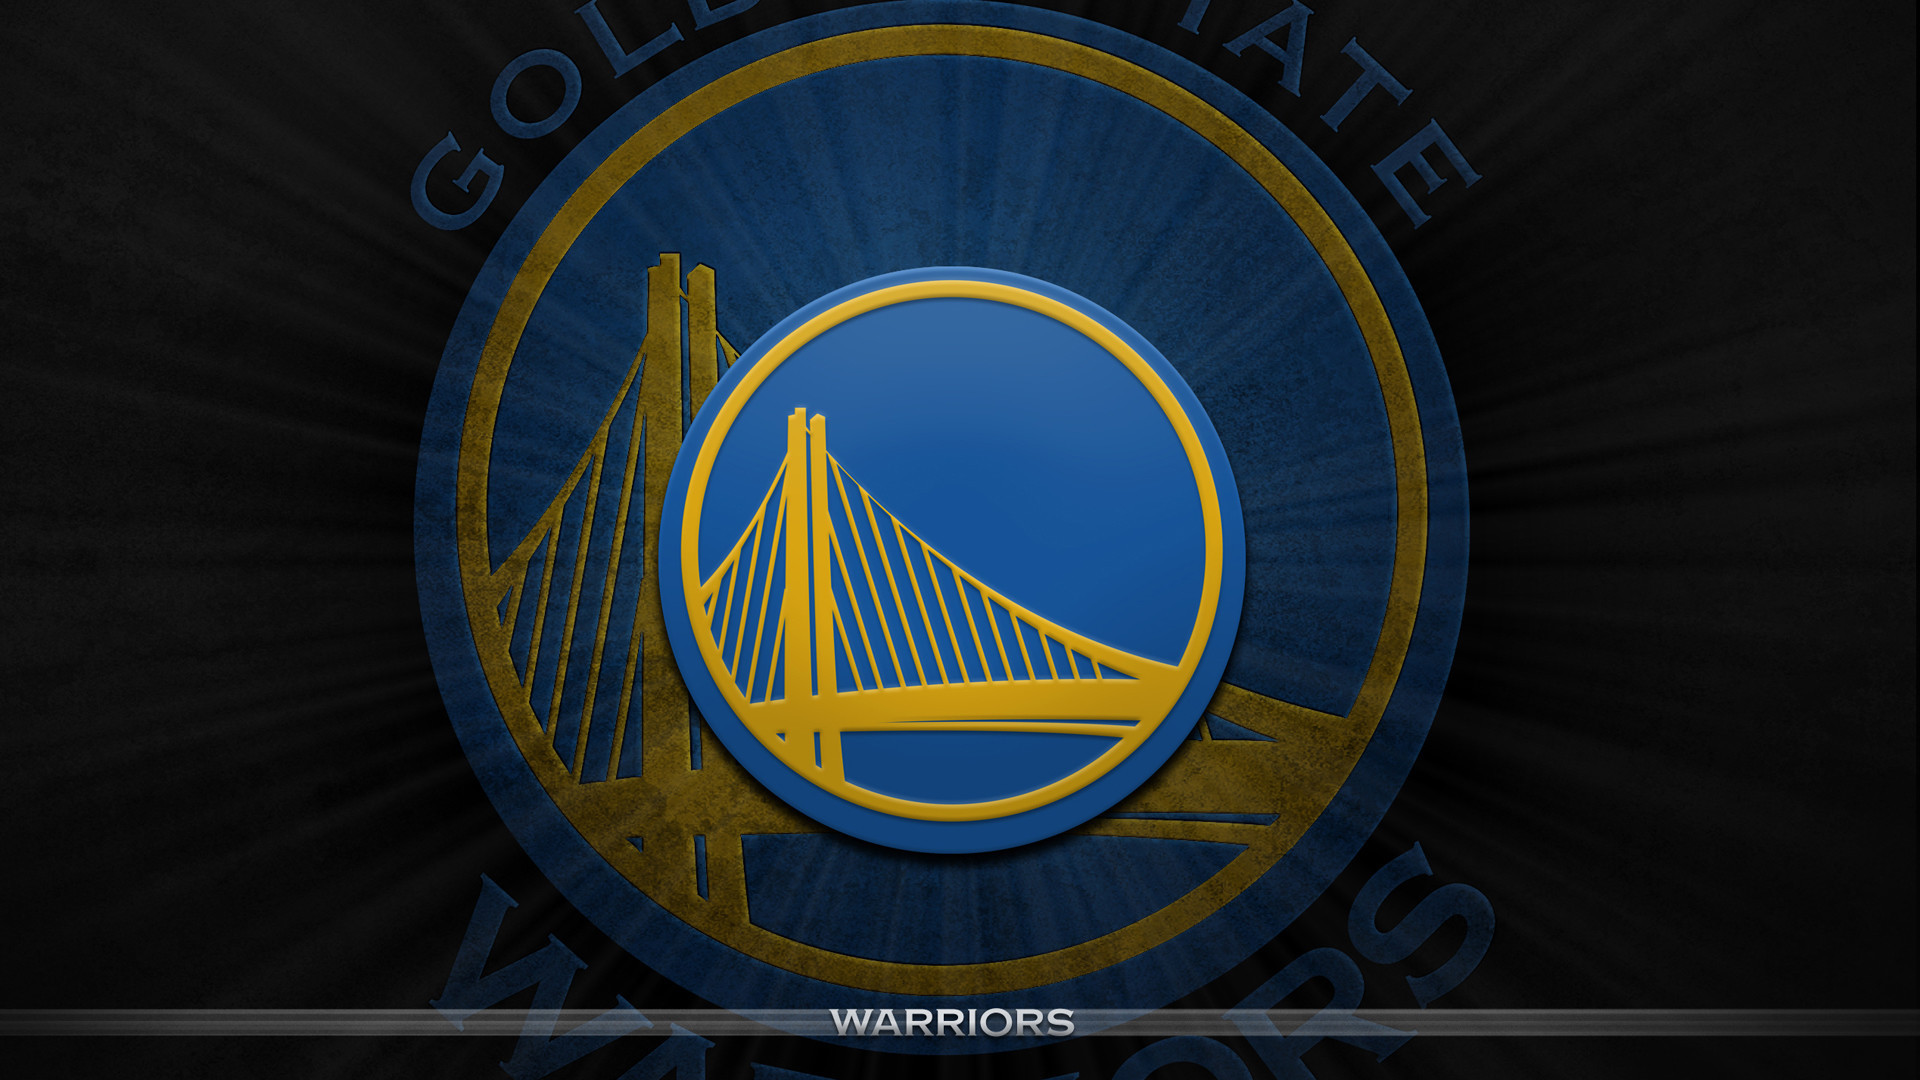 Golden State Warriors Champions Wallpapers (79+ images)1920 x 1080